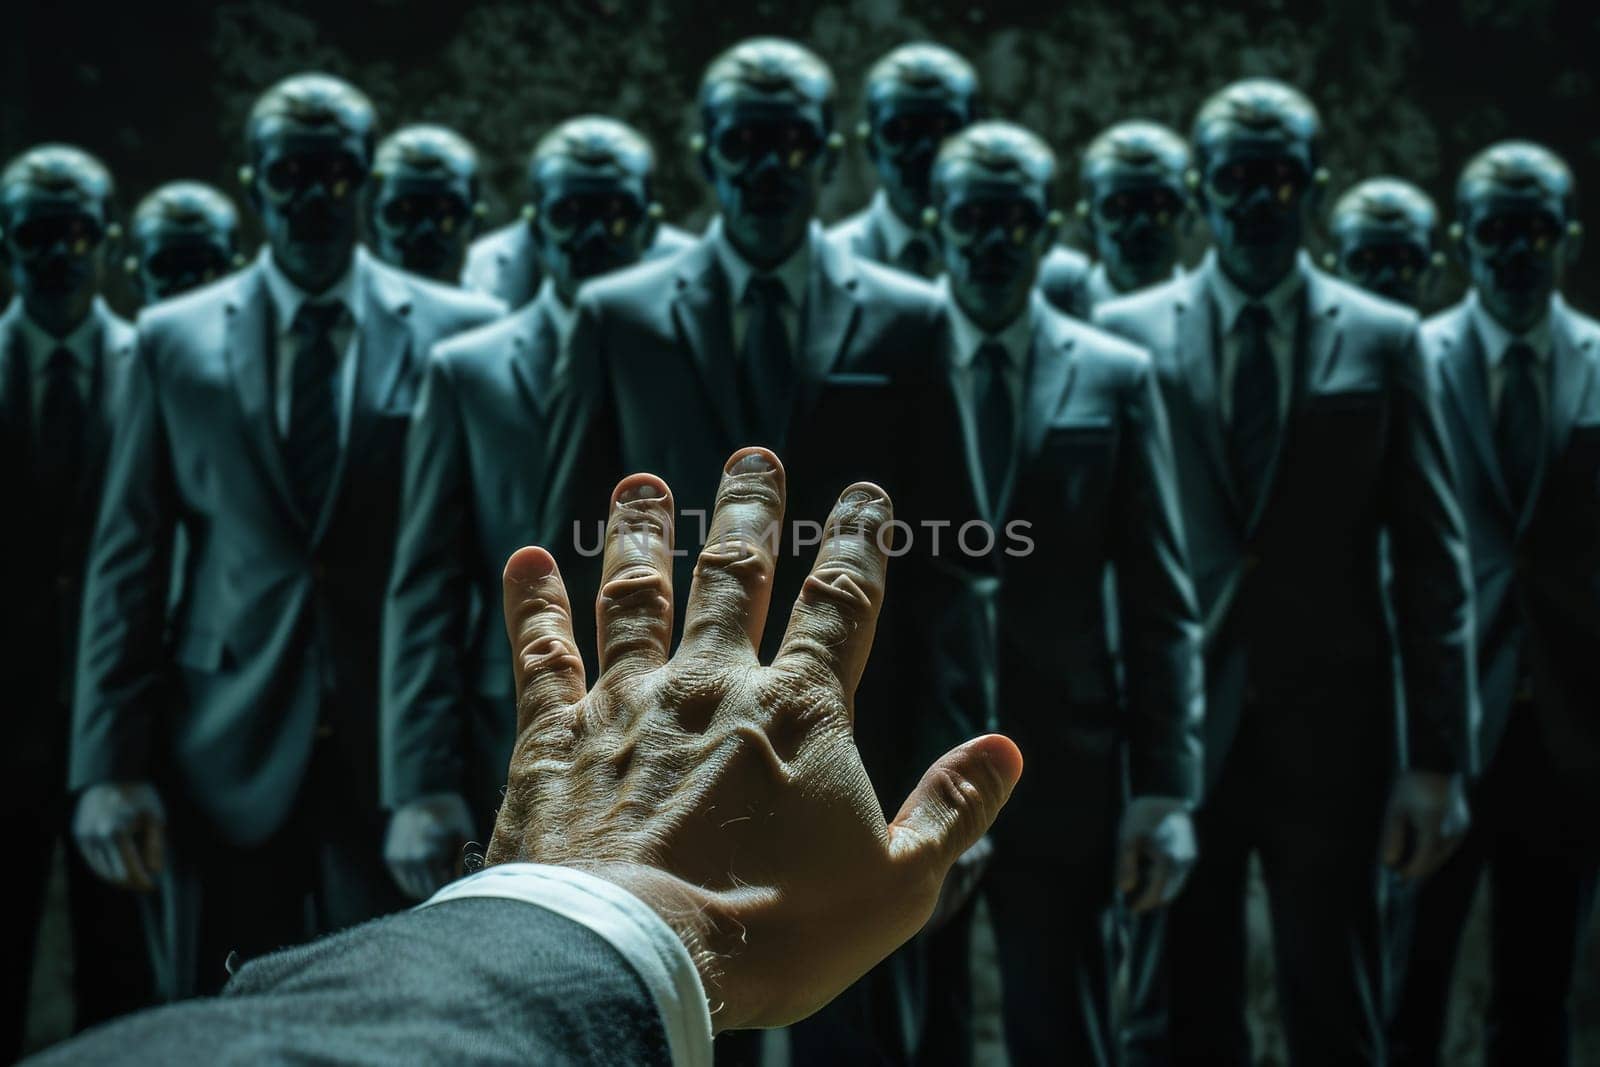 A hand is reaching out to a group of people in suits. Concept of unity and collaboration among the group